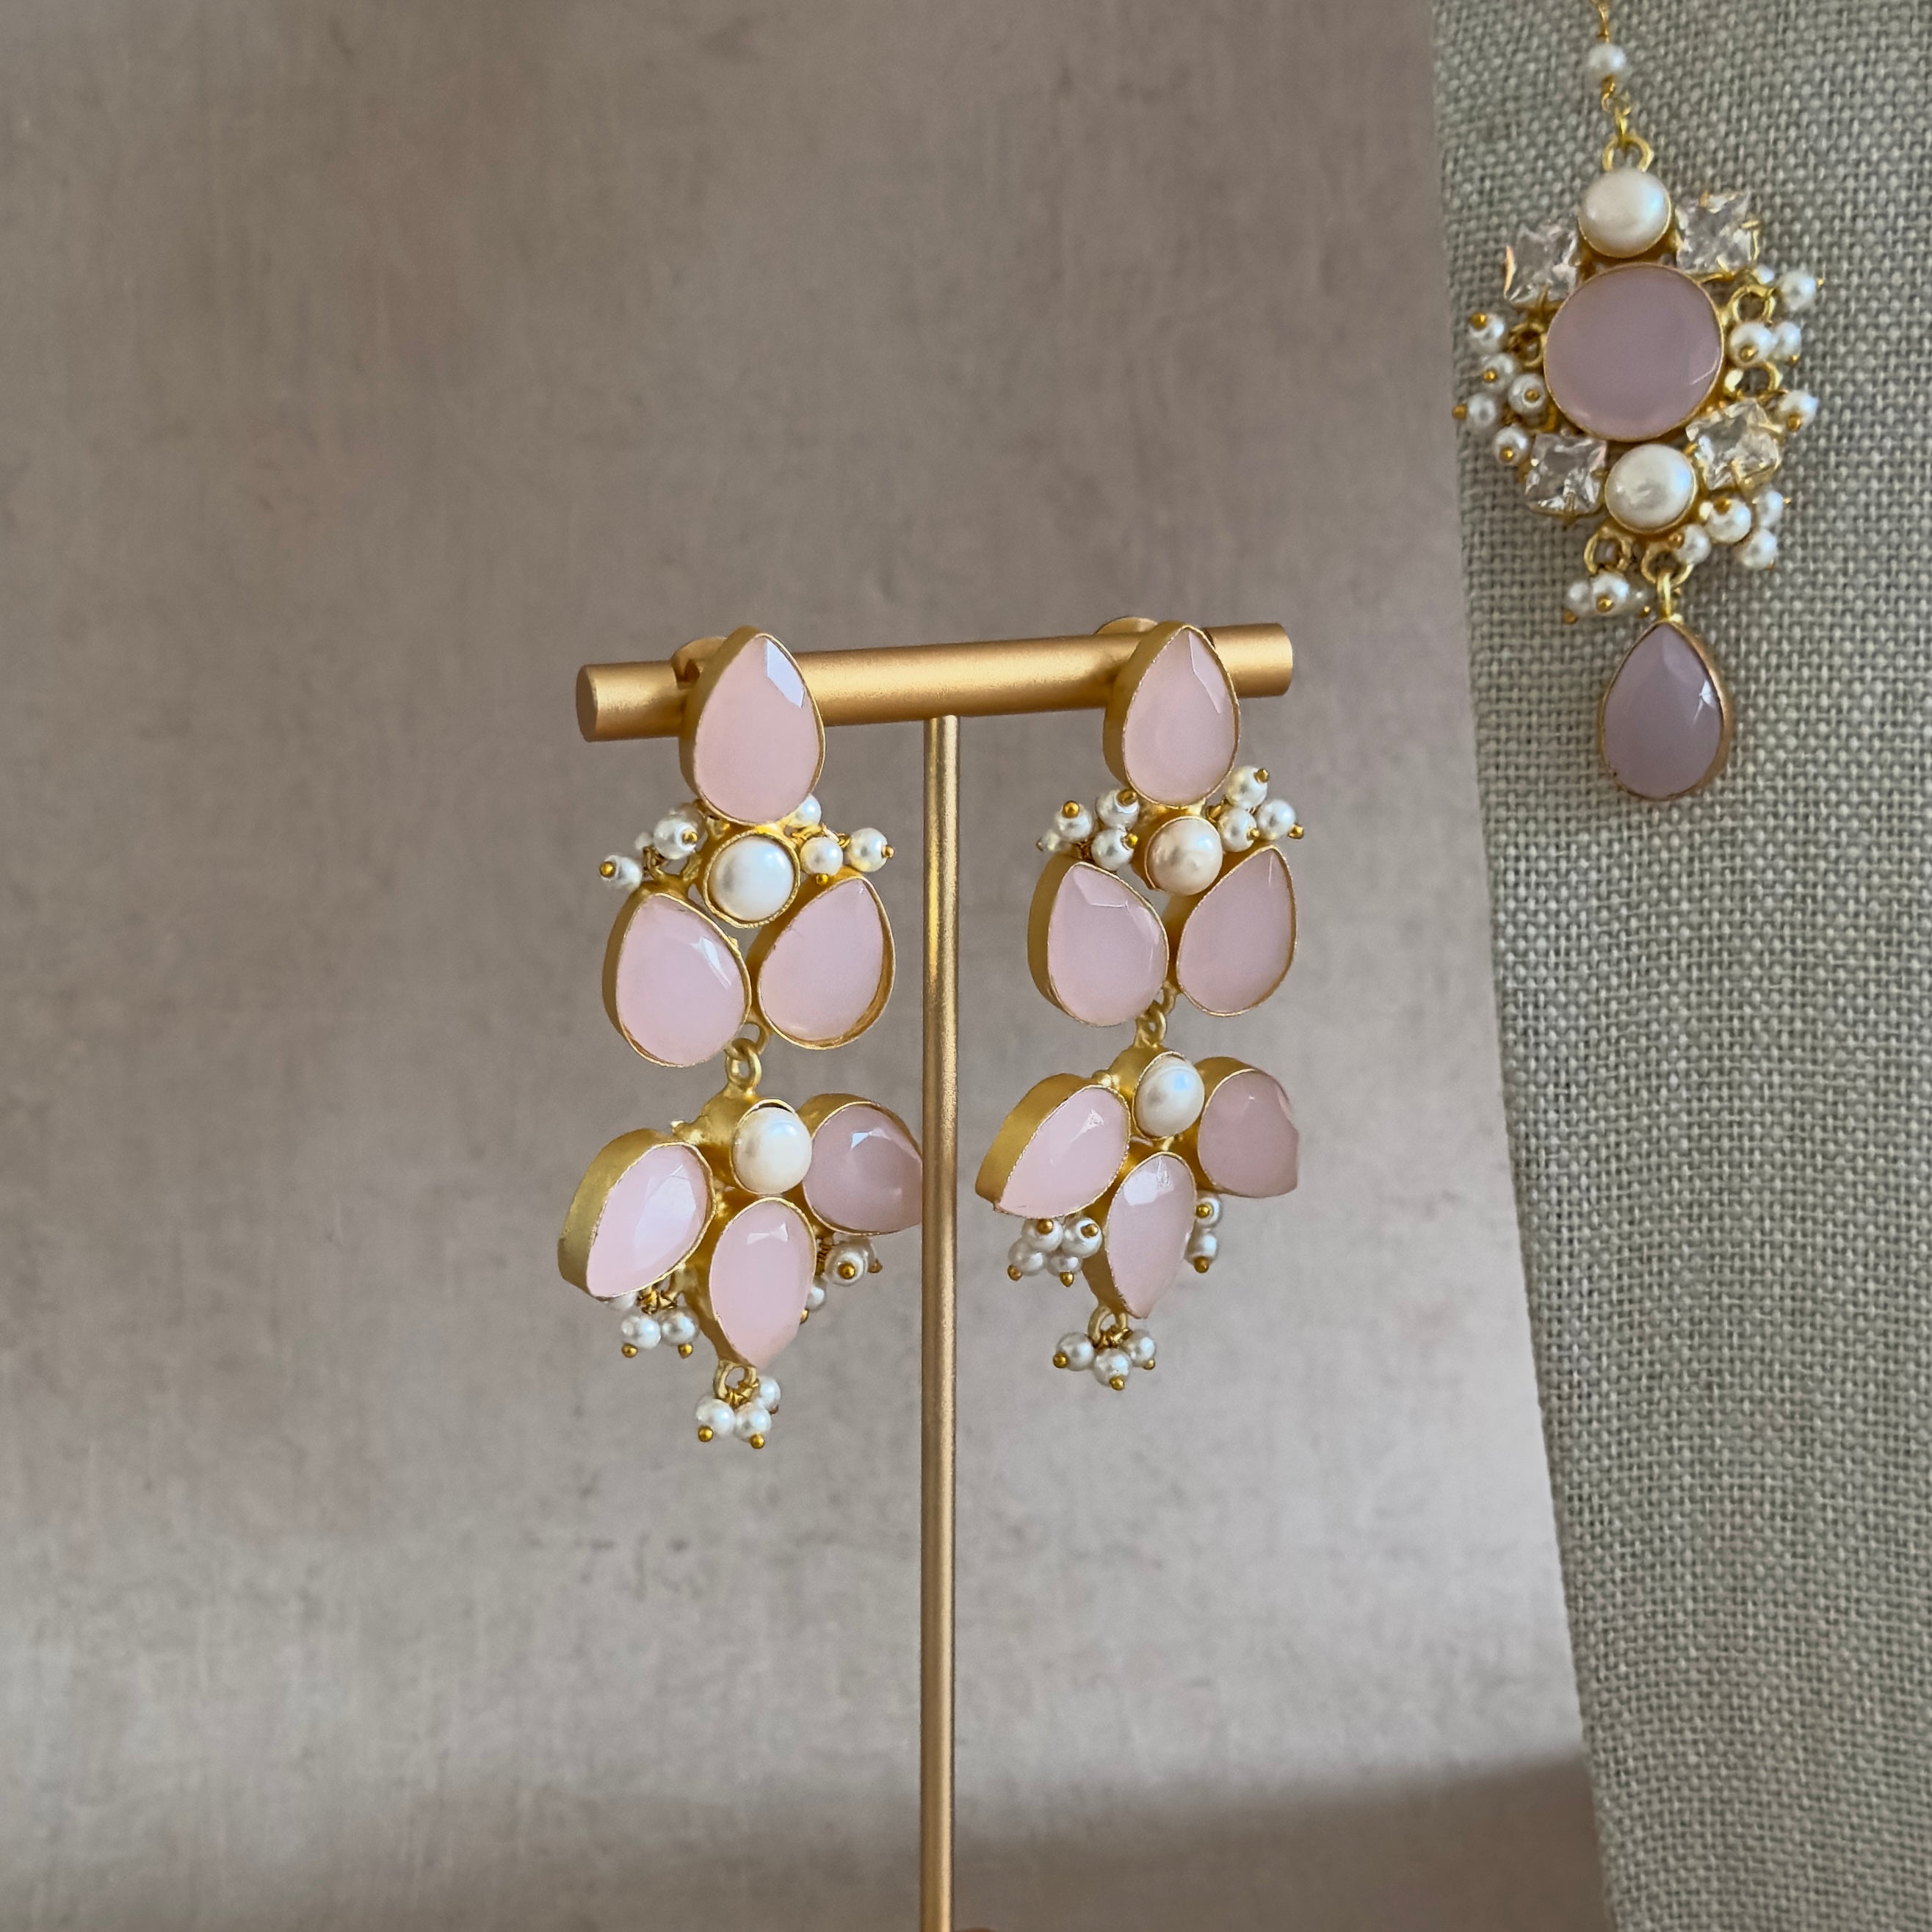 Indulge in the rich beauty of our Bali Pink Necklace Set. The stunning pink color, paired with delicate pearl accents and dazzling cz crystals, will add a touch of elegance to any outfit. The adjustable tie allows for a perfect fit and the set includes matching earrings and tikka for a complete look. Elevate your style with this must-have accessory